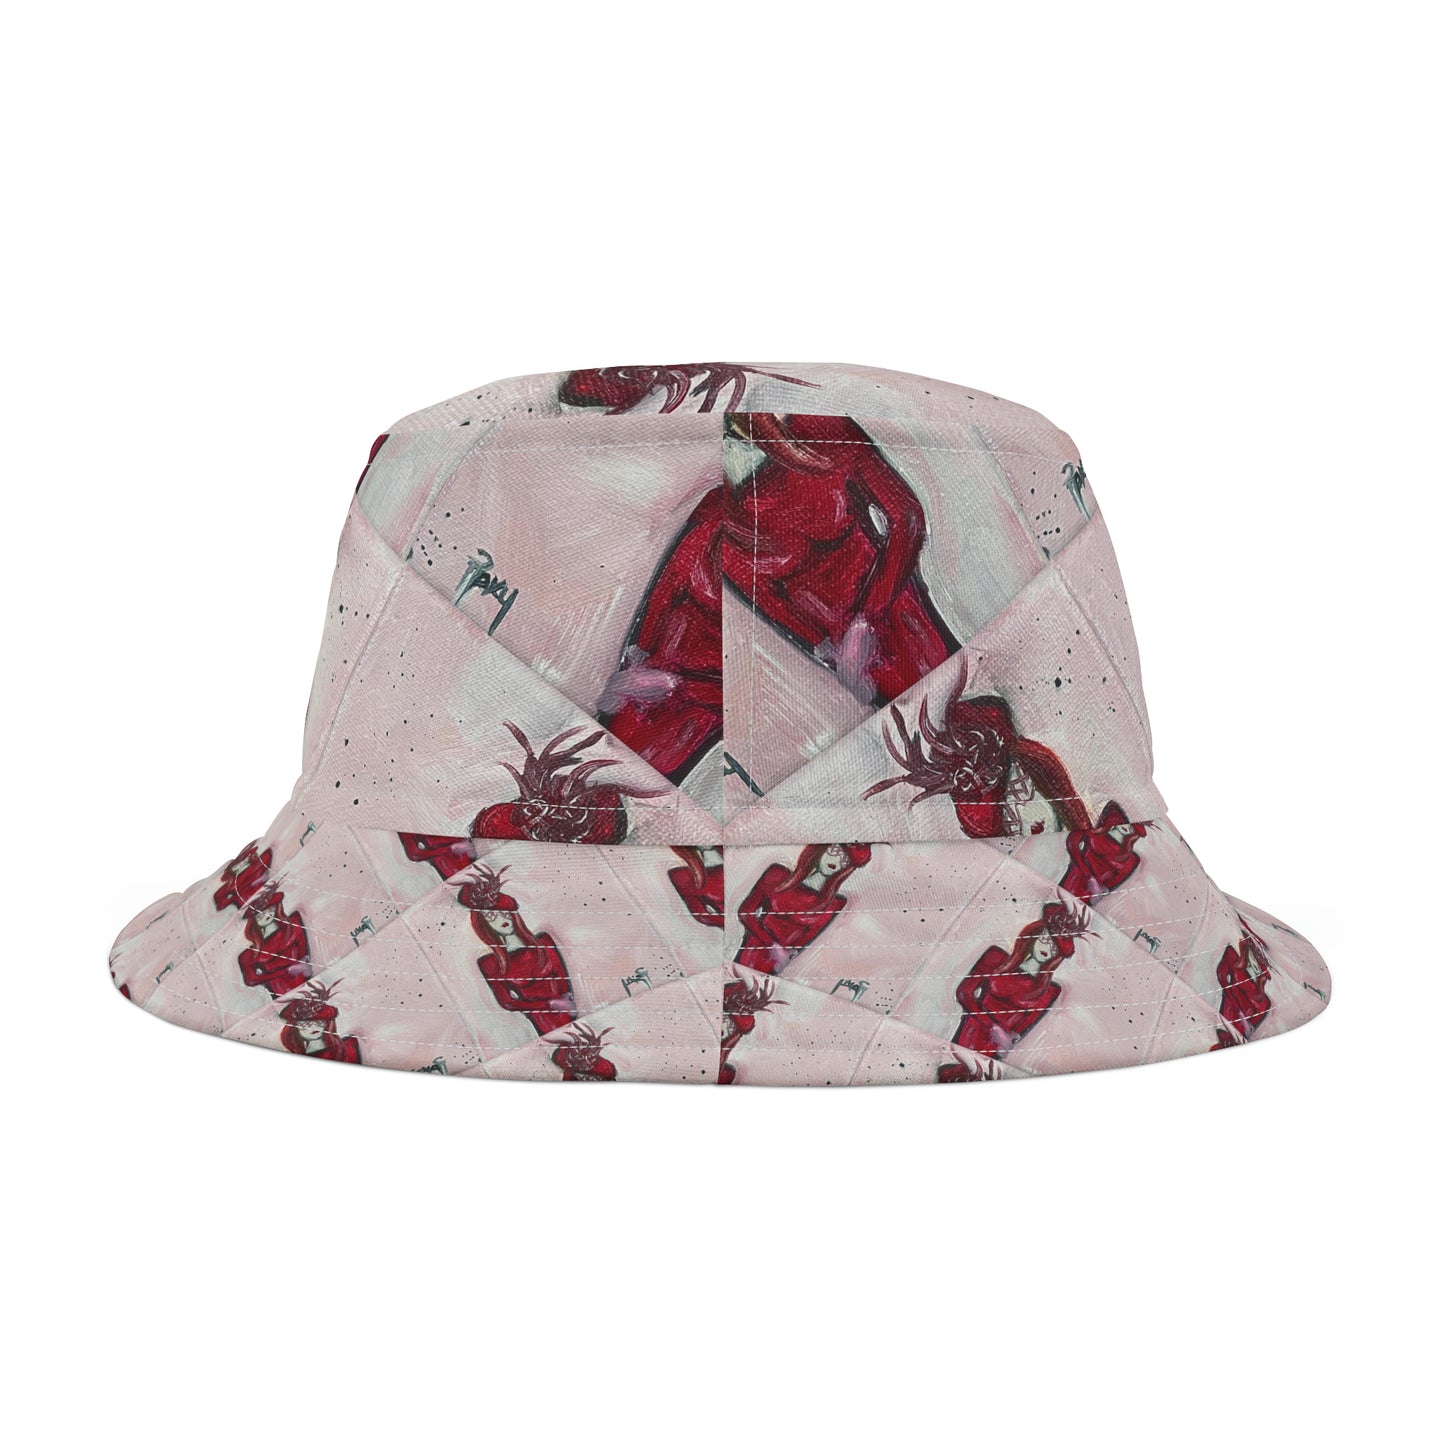 Fascinating in Red Bucket Hat